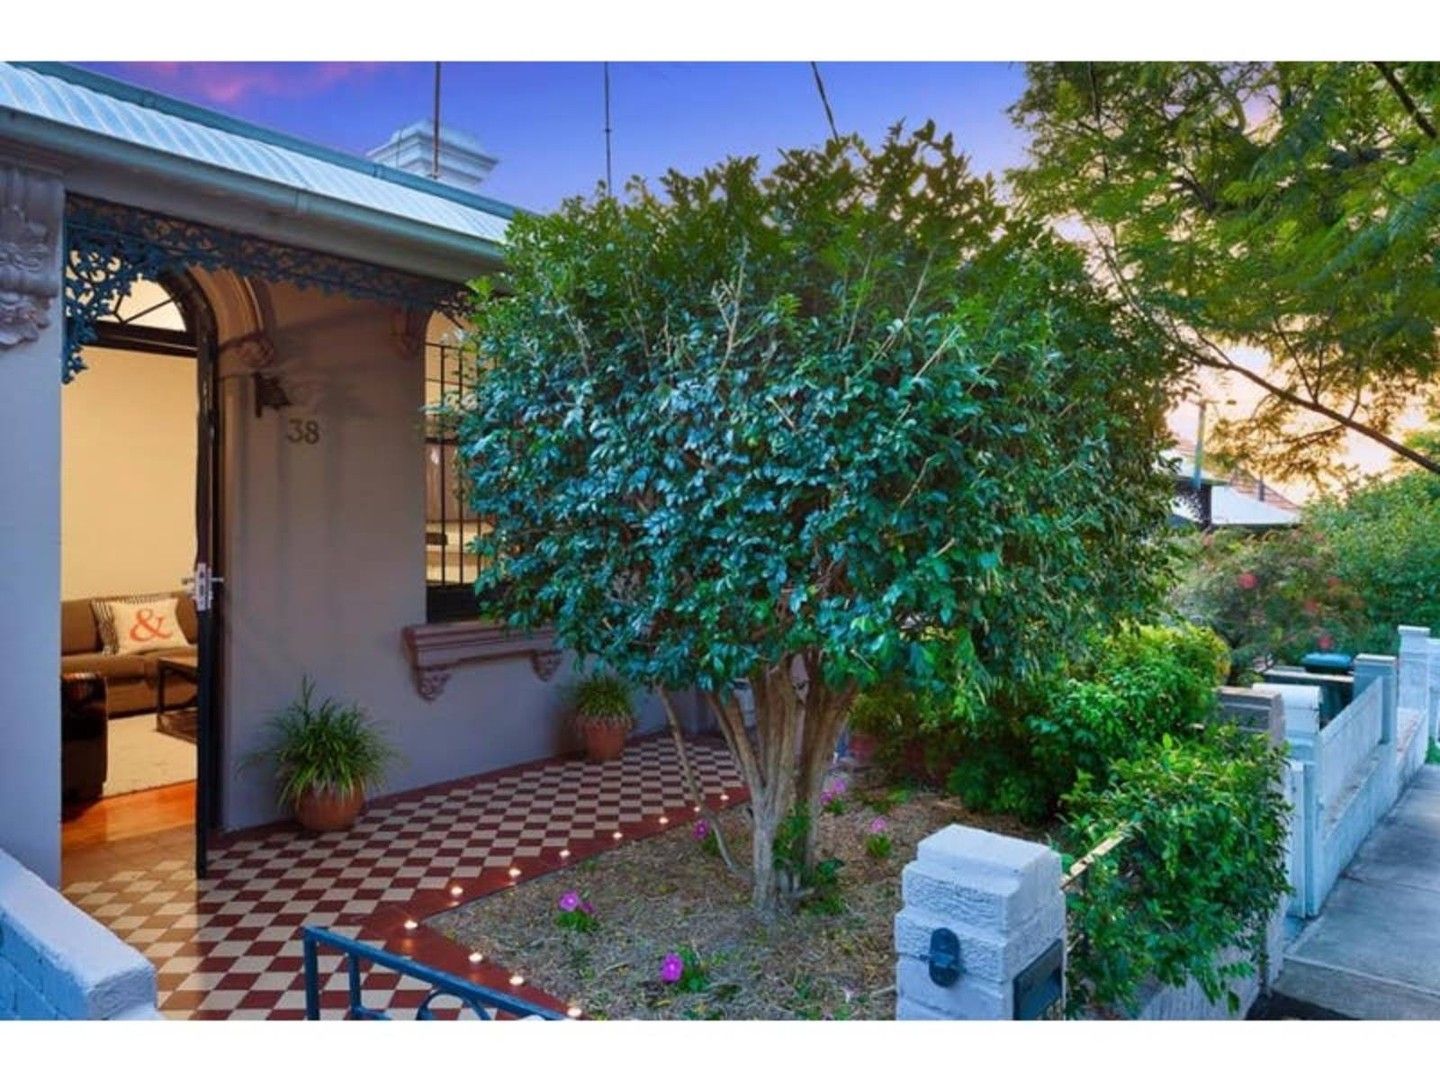 2 bedrooms House in 38 Day Street LEICHHARDT NSW, 2040